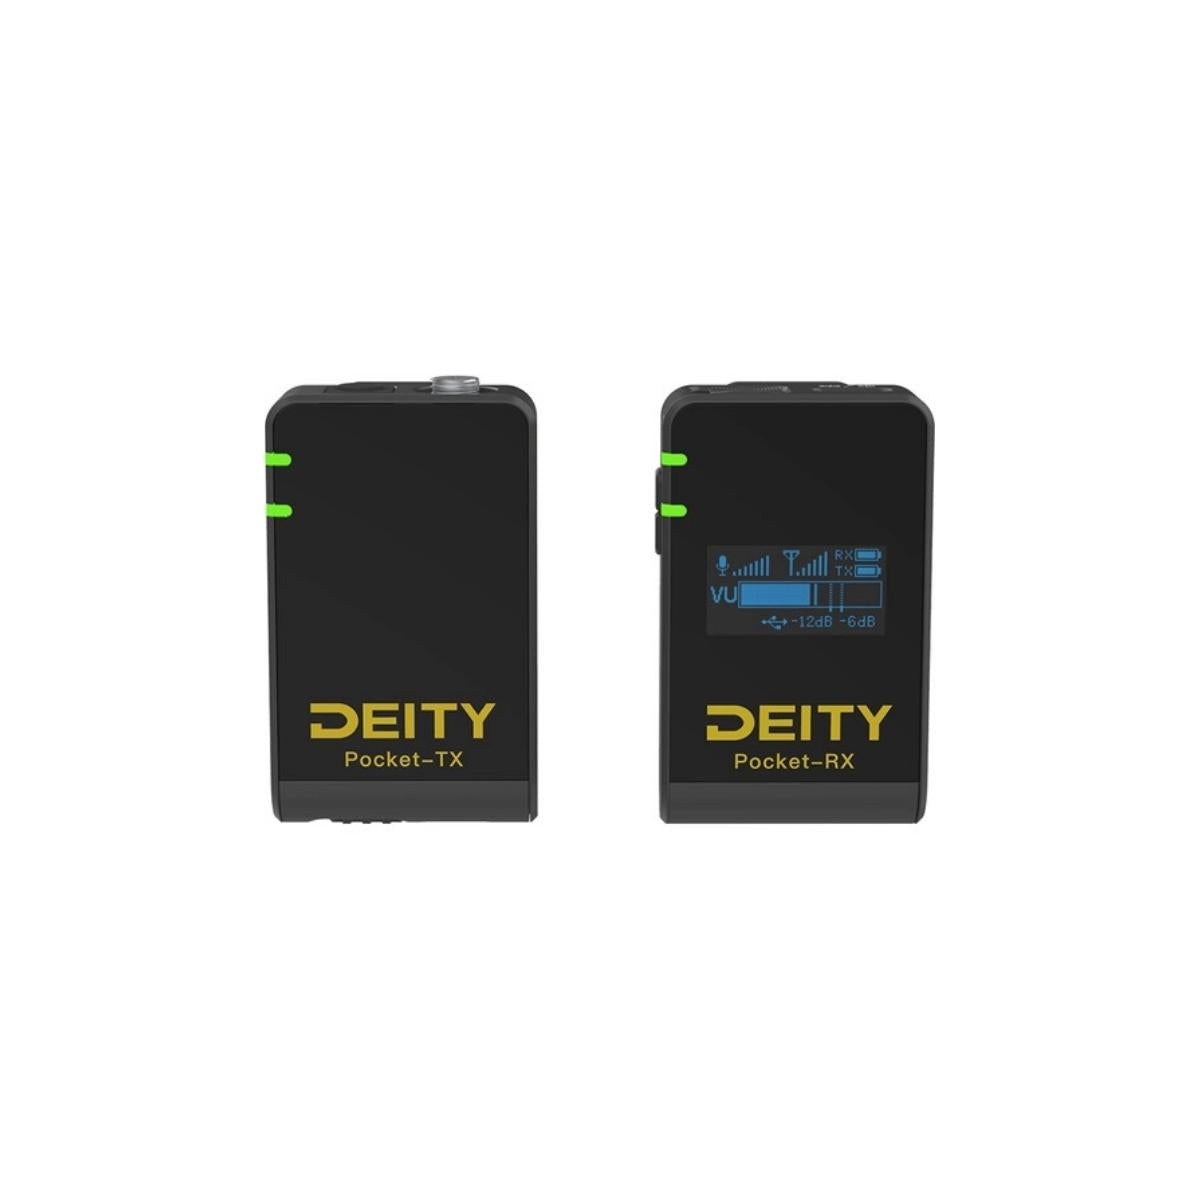 Deity Pocket Wireless Omnidirectional Clip-On Microphone System with 65M Range Operation, 5-Hour Battery Life, 3.5mm TRRS Cable (Black, White)